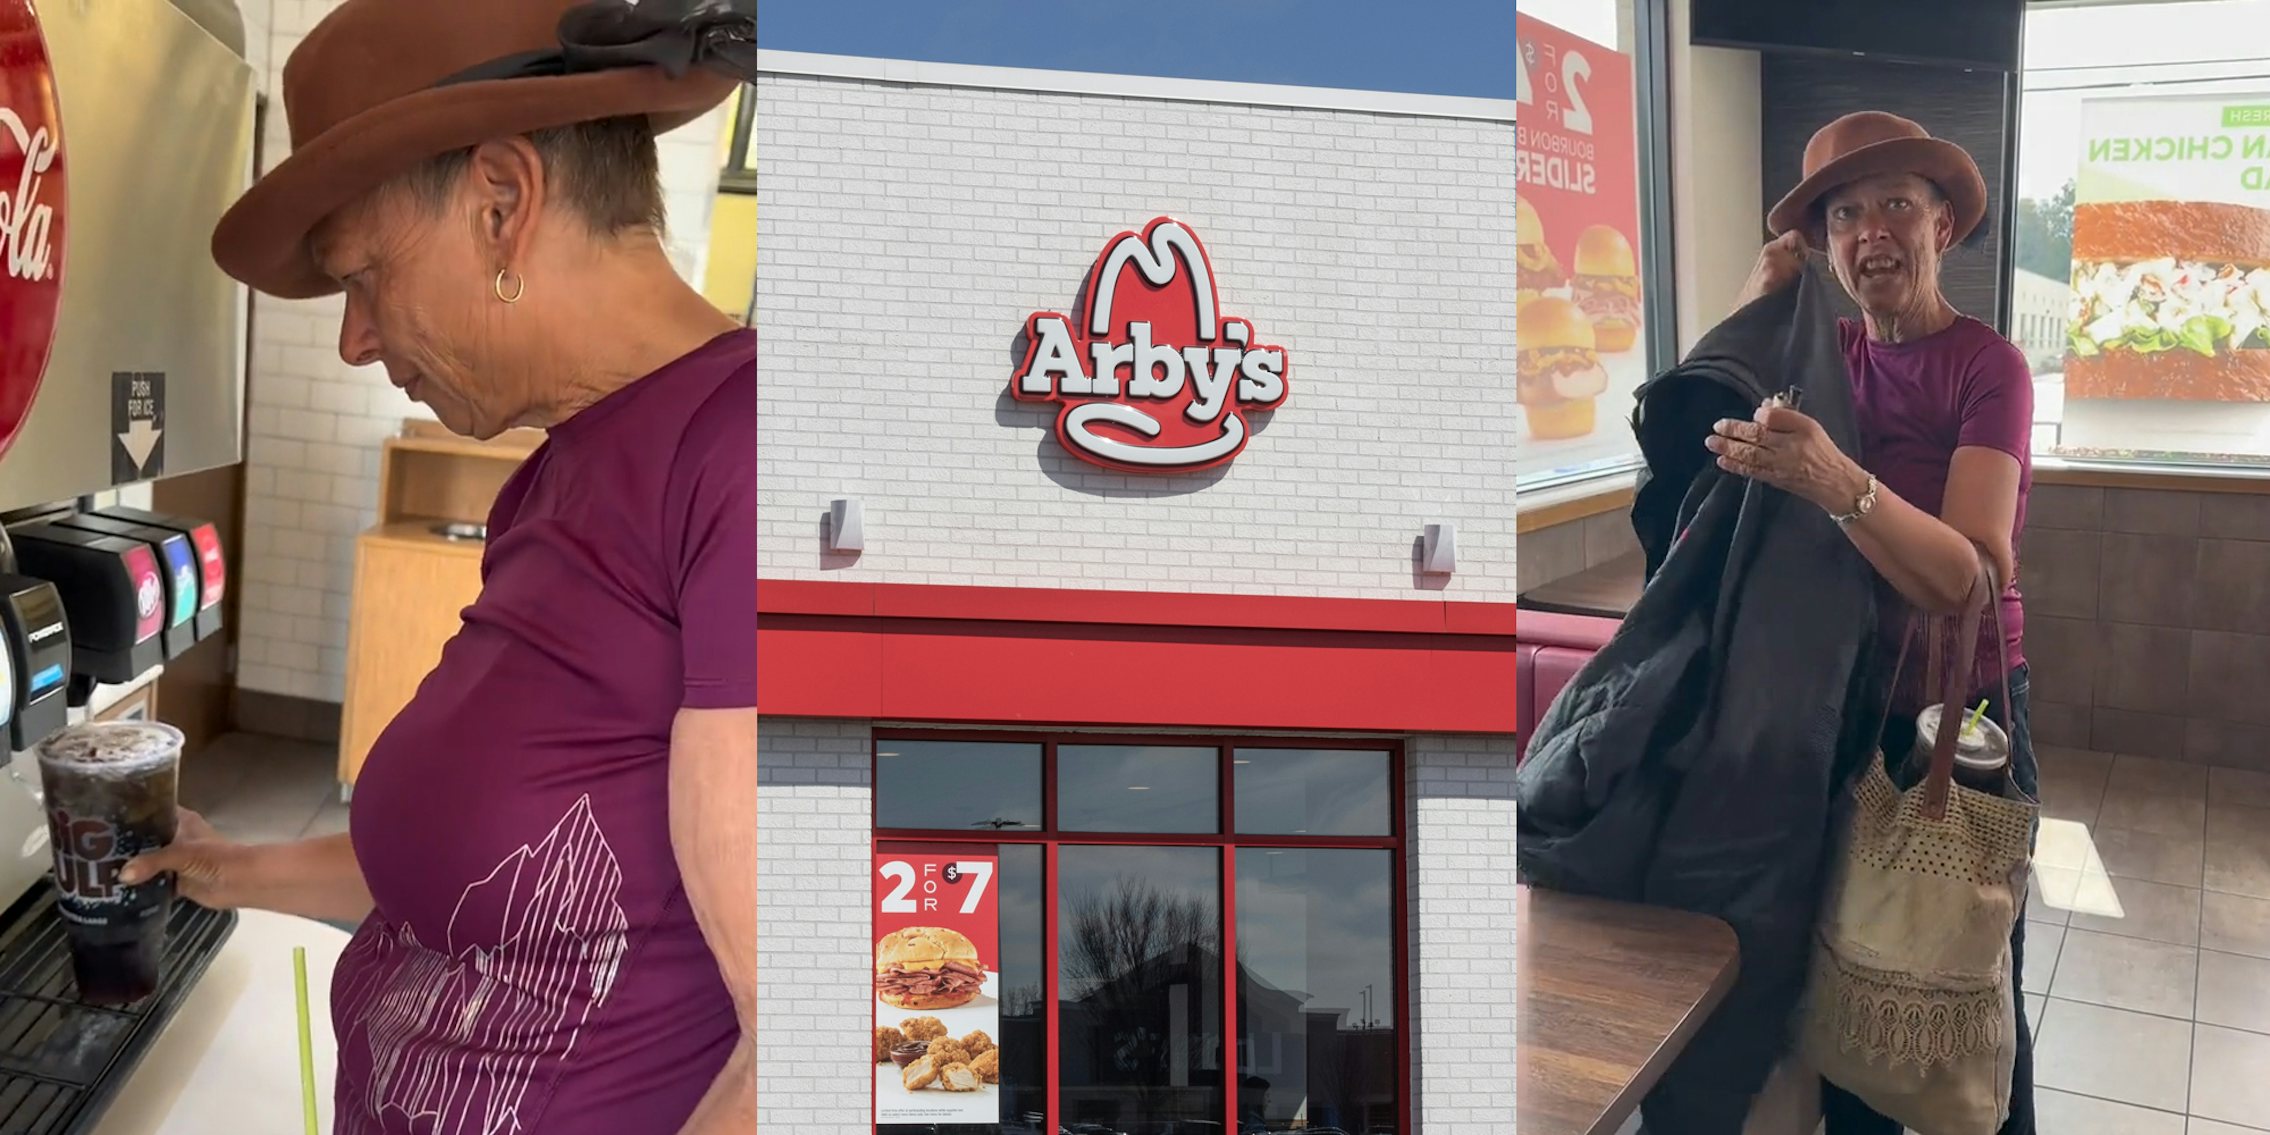 Arby's customer filling 7/11 Big Gulp cup with fountain drink (l) Arby's building with sign (c) Arby's customer speaking while grabbing belongings (r)